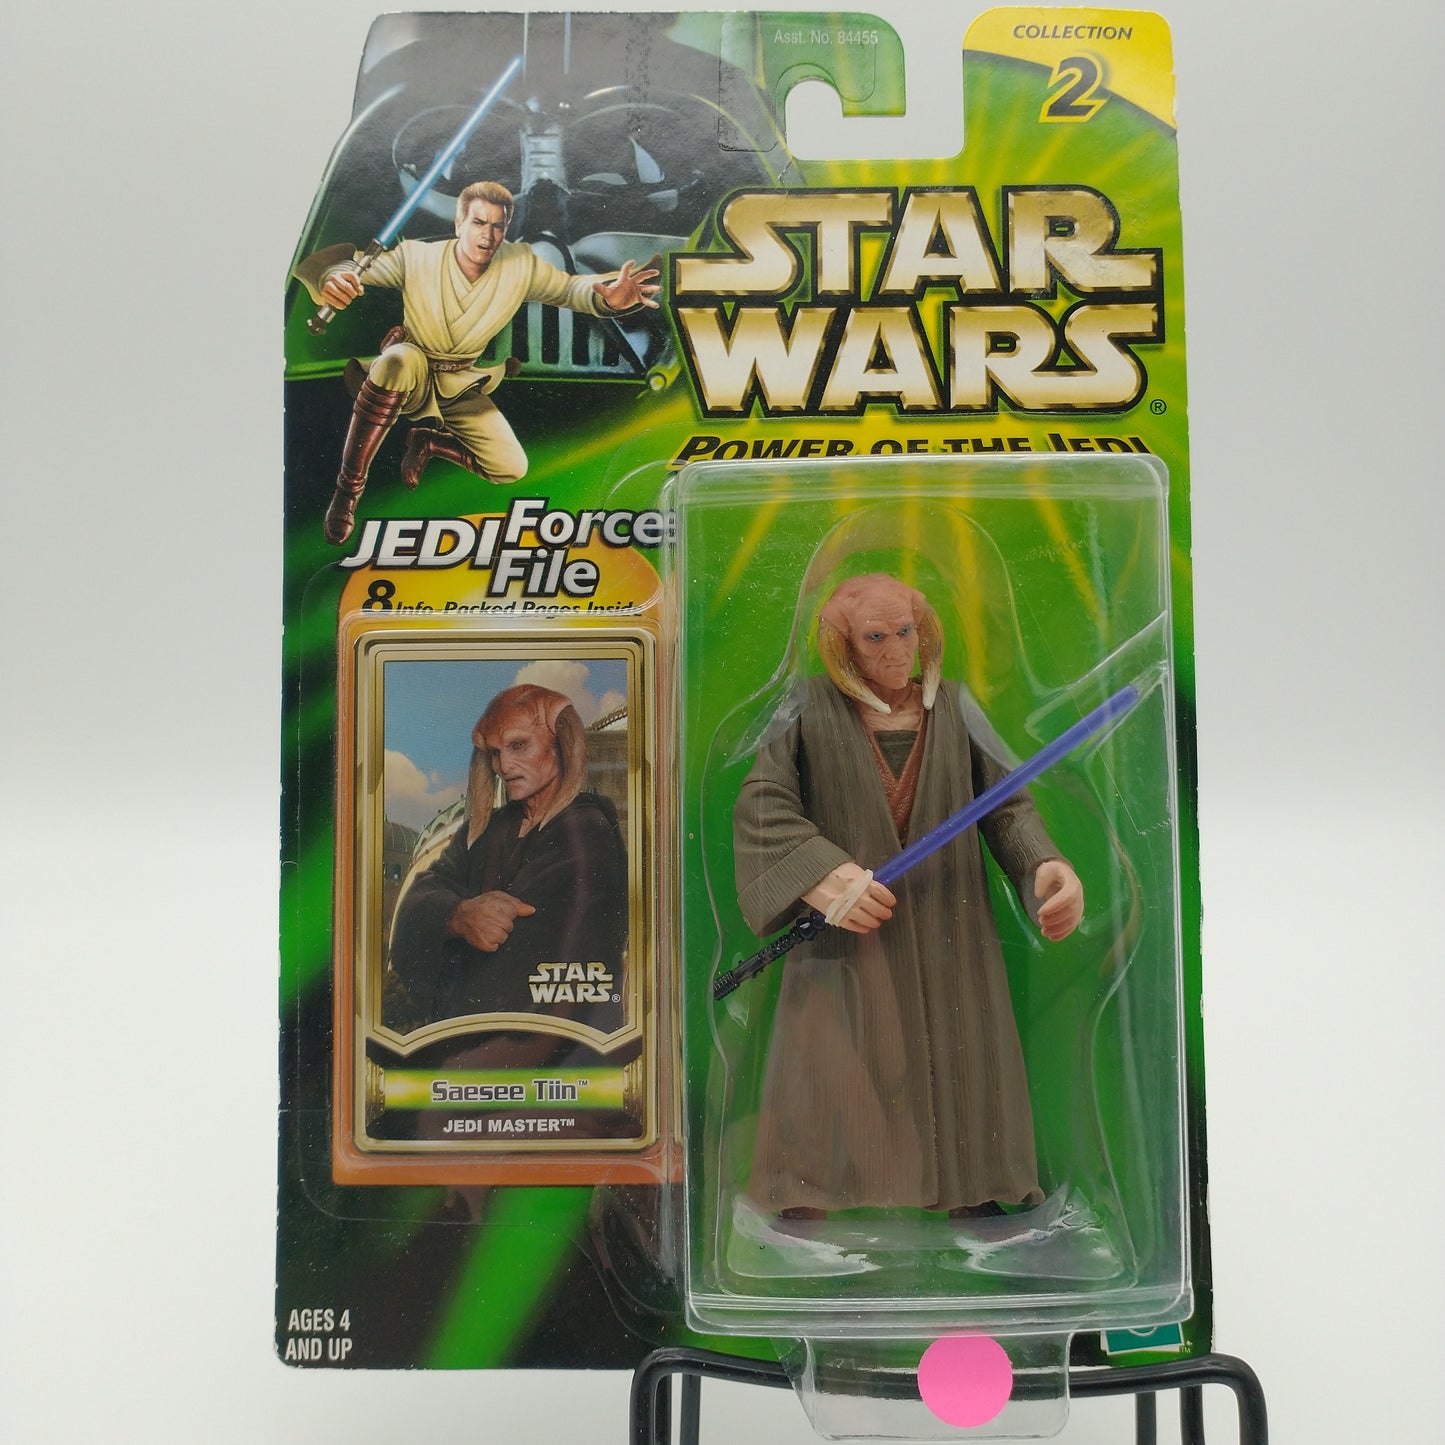 The front of the card and bubble are in good condition and intact. The action figure is a humanoid alien with downward curving tusks and long brown robes. He's holding a blue lightsaber